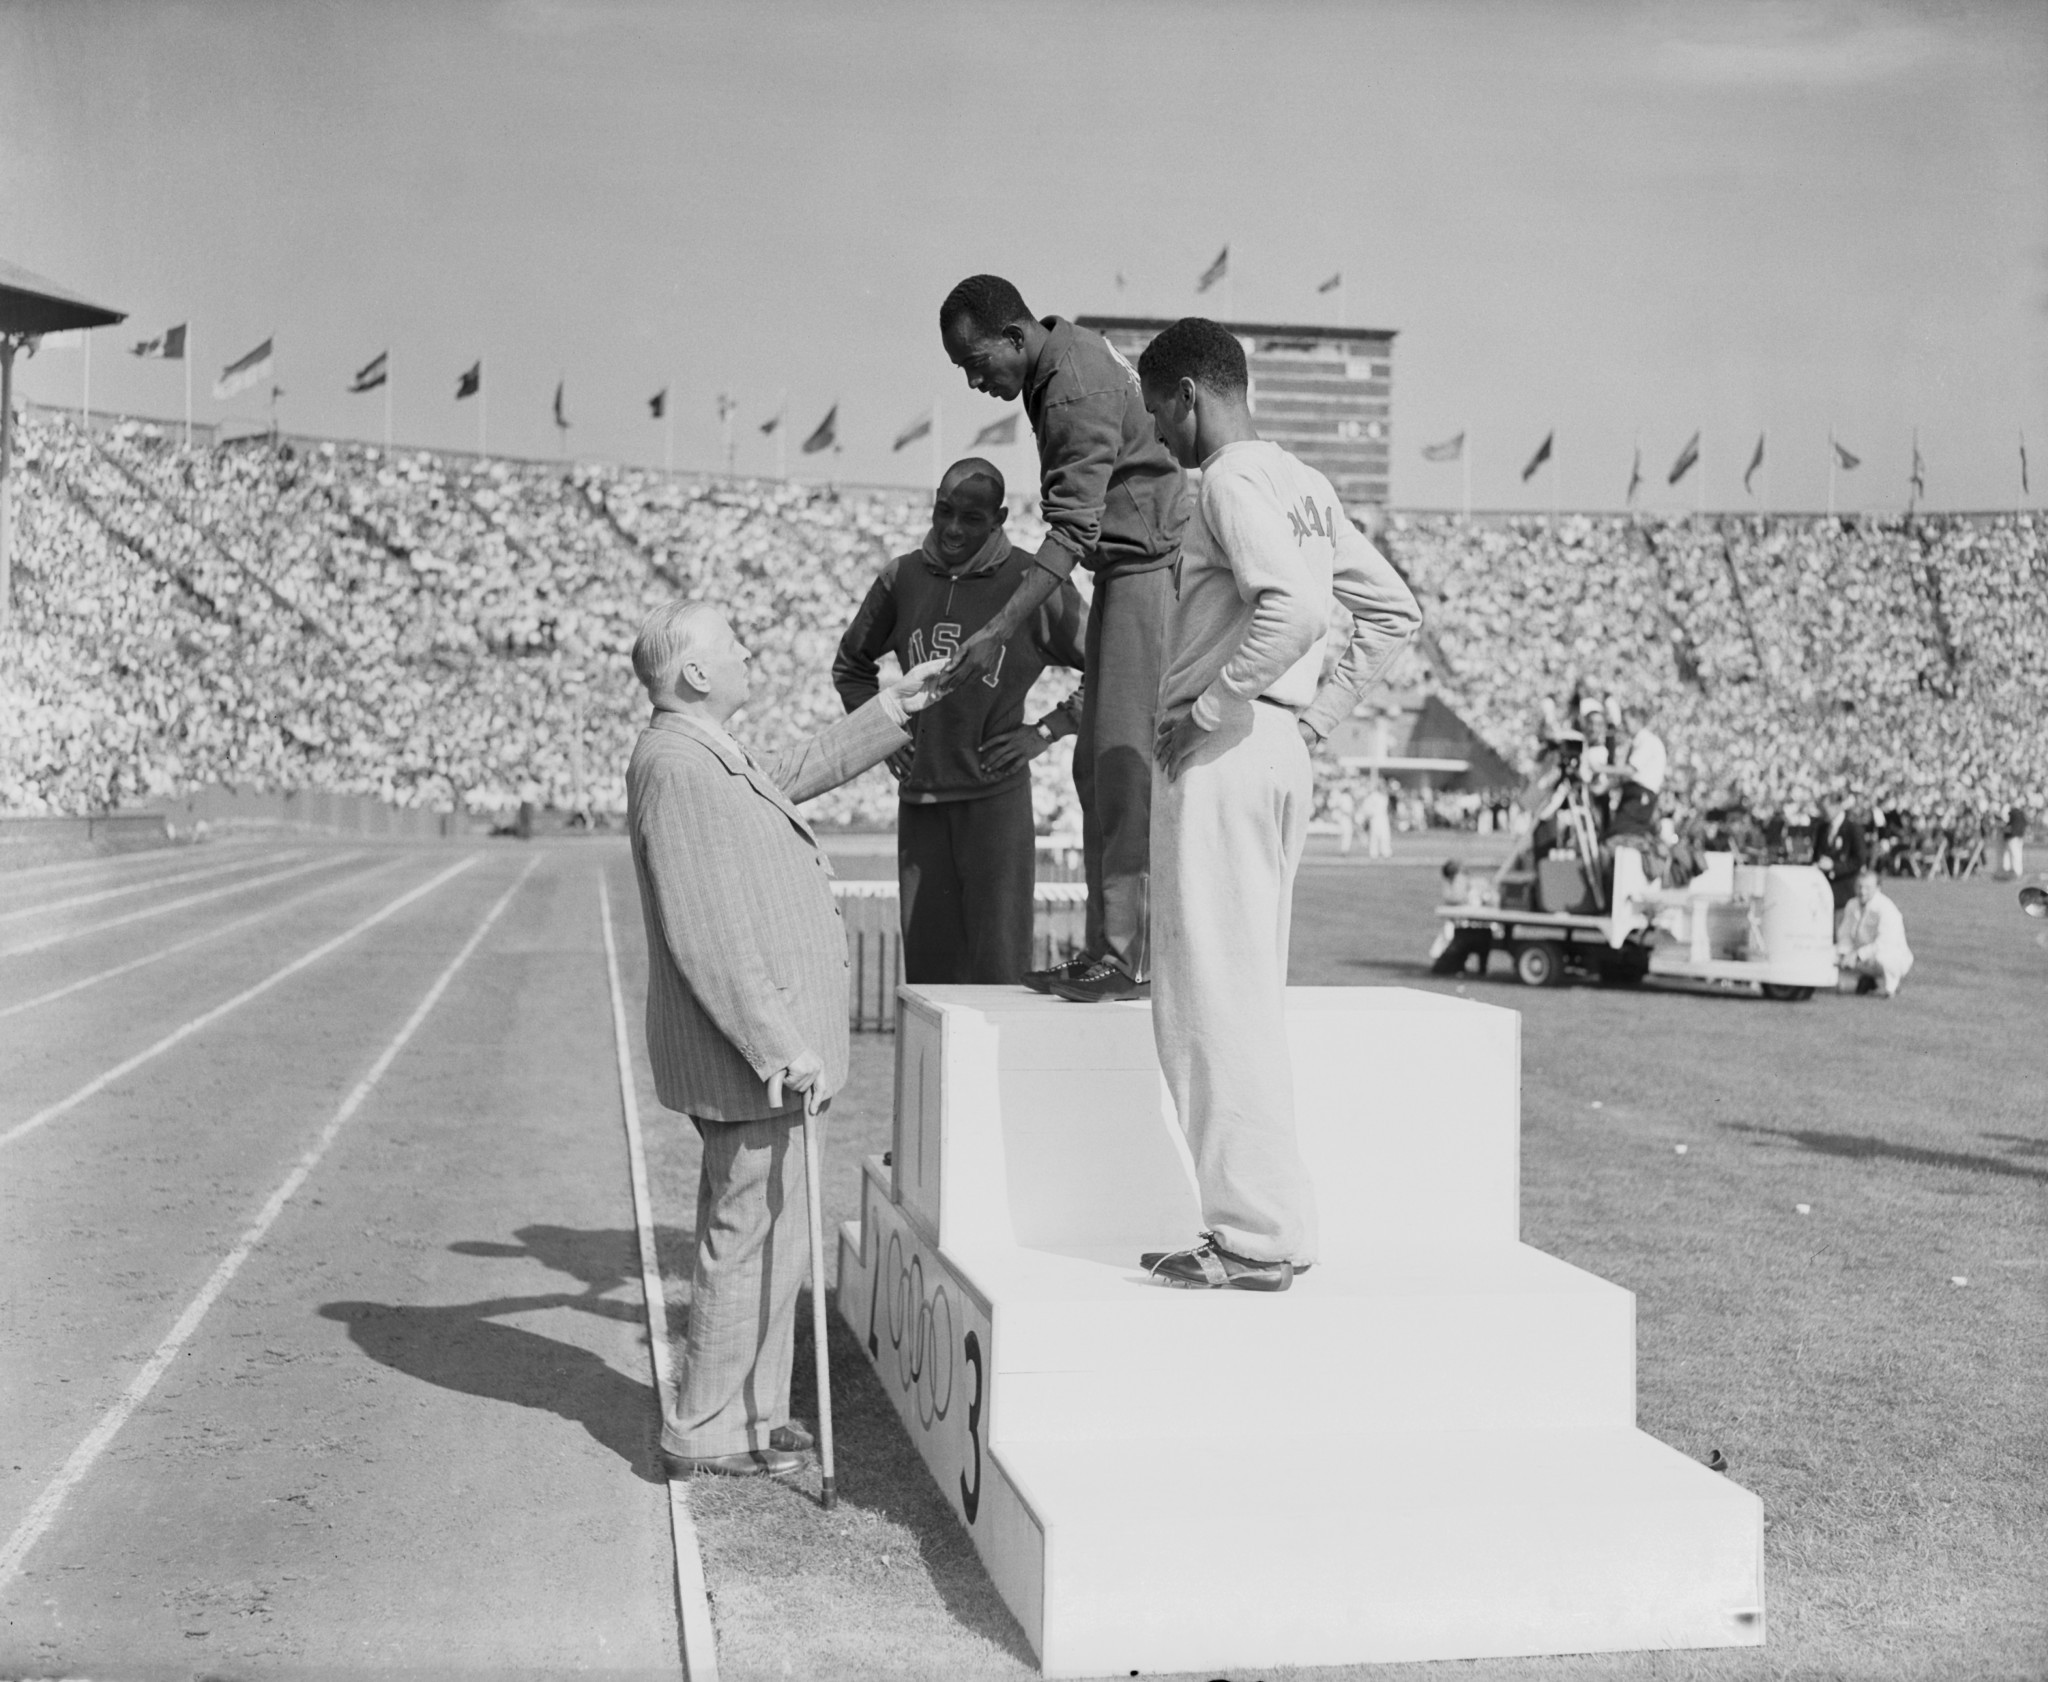 In 1948, Harrison Dillard received his 100m gold medal from International Olympic Committee President Sigfrid Edström ©Getty Images